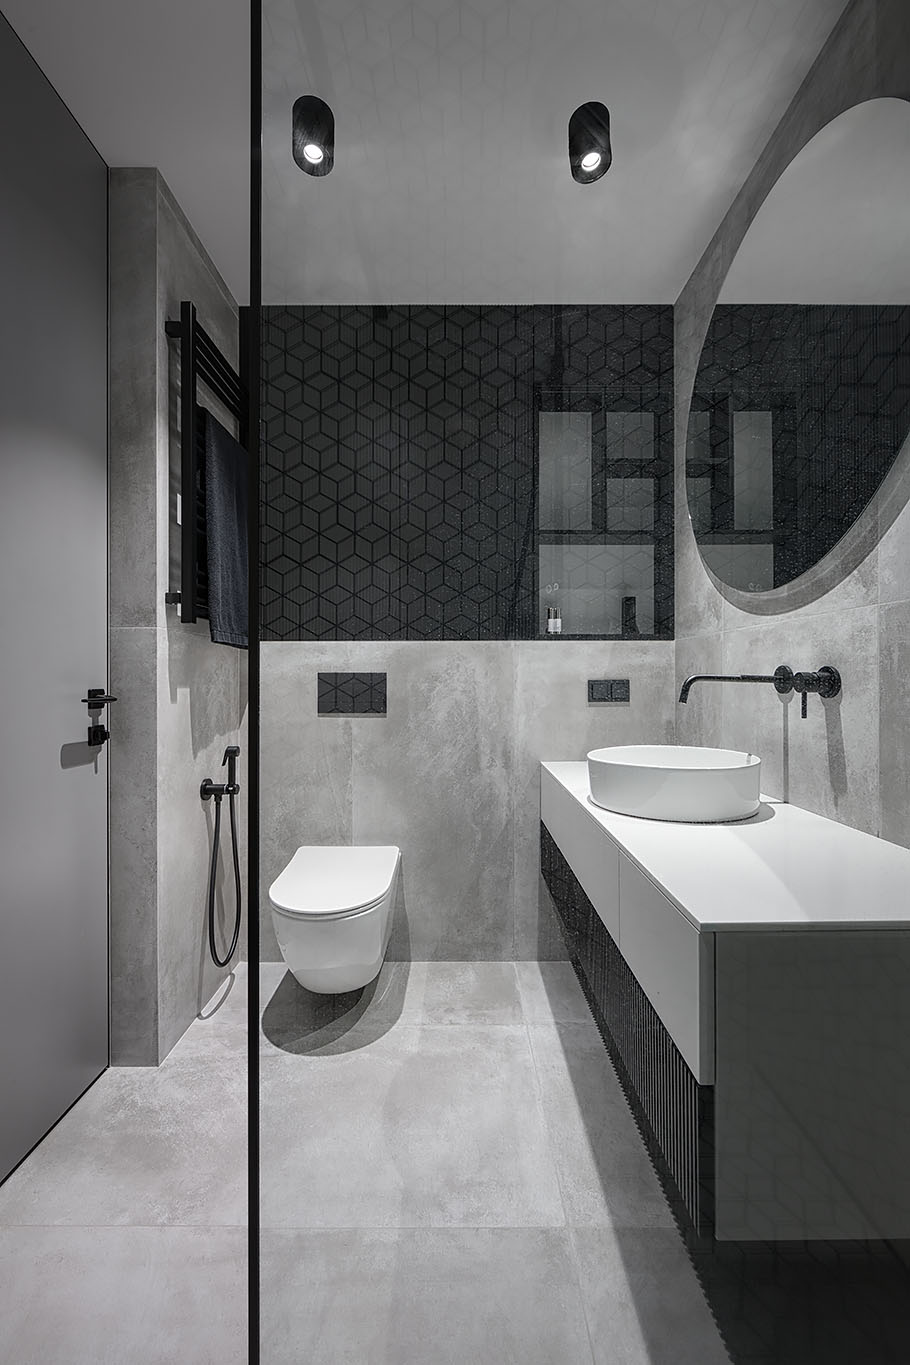 The bathroom includes a white, gray and black interior, with a bright white vanity, concrete wall and floor tiles, white geometric tiles with black grout, and a custom black shelving niche.